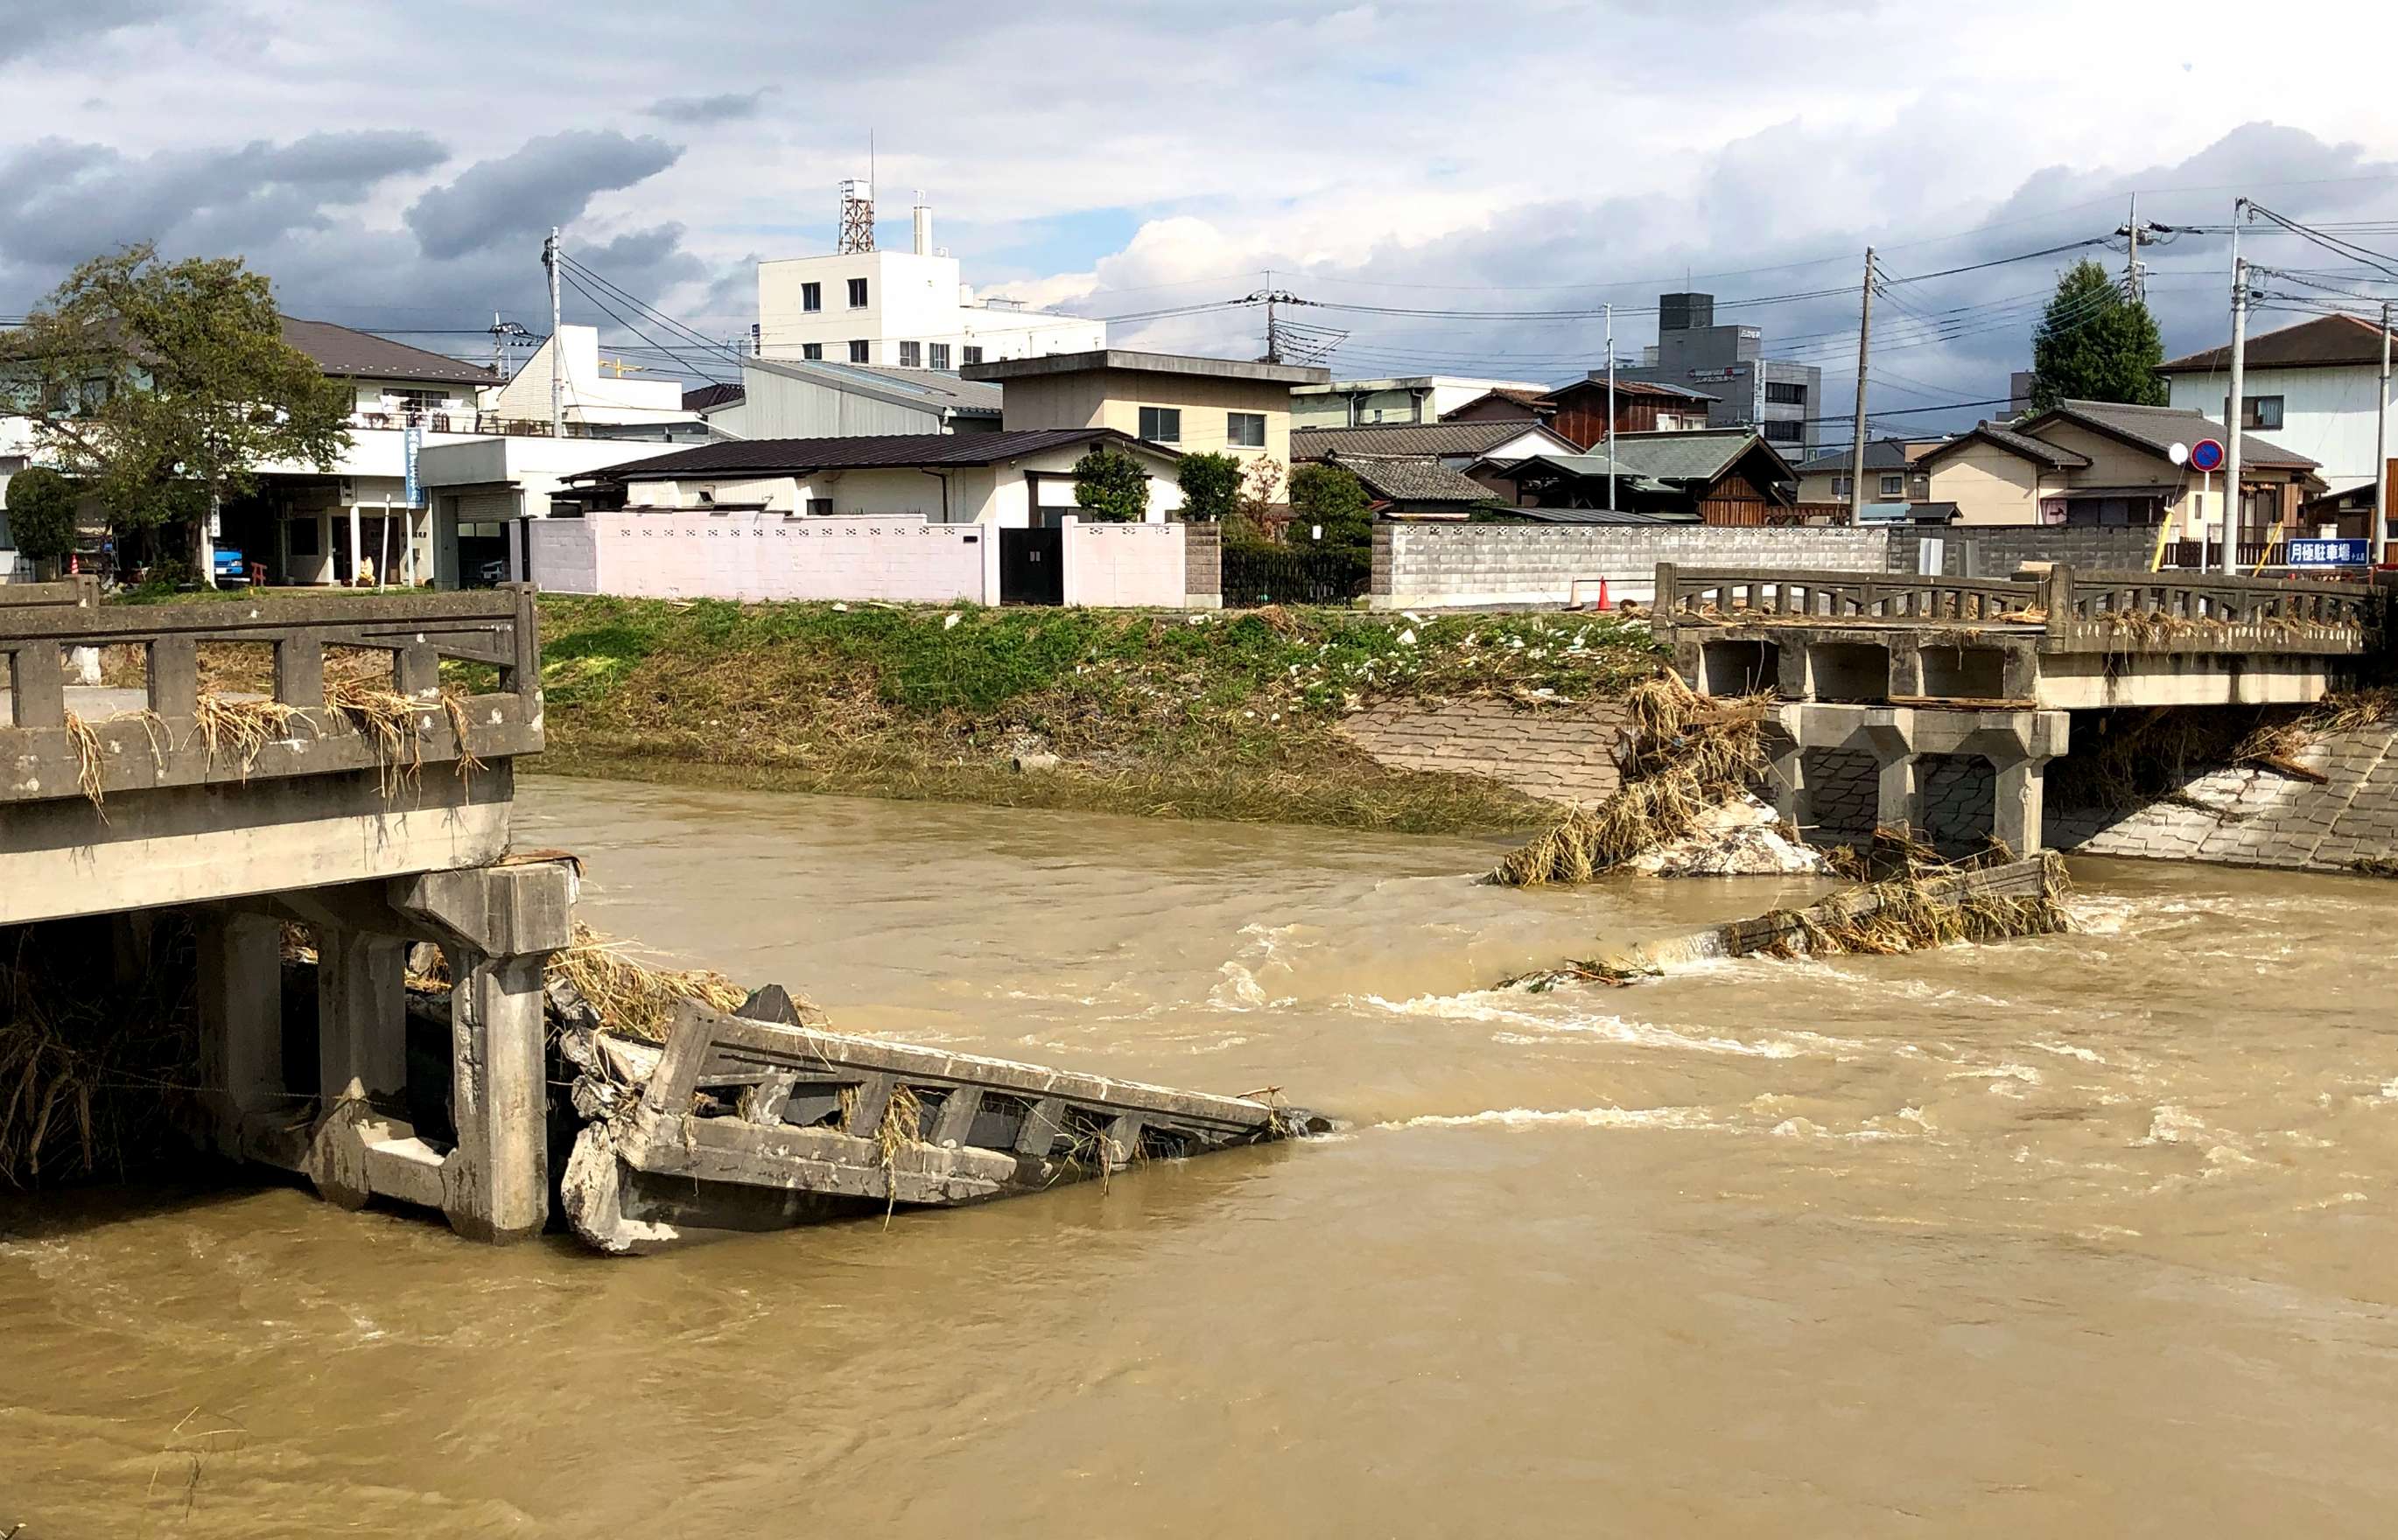 A photograph of a bridge collapsed into a river of fast moving, muddy water with houses and rooftops of a town visible in the background.